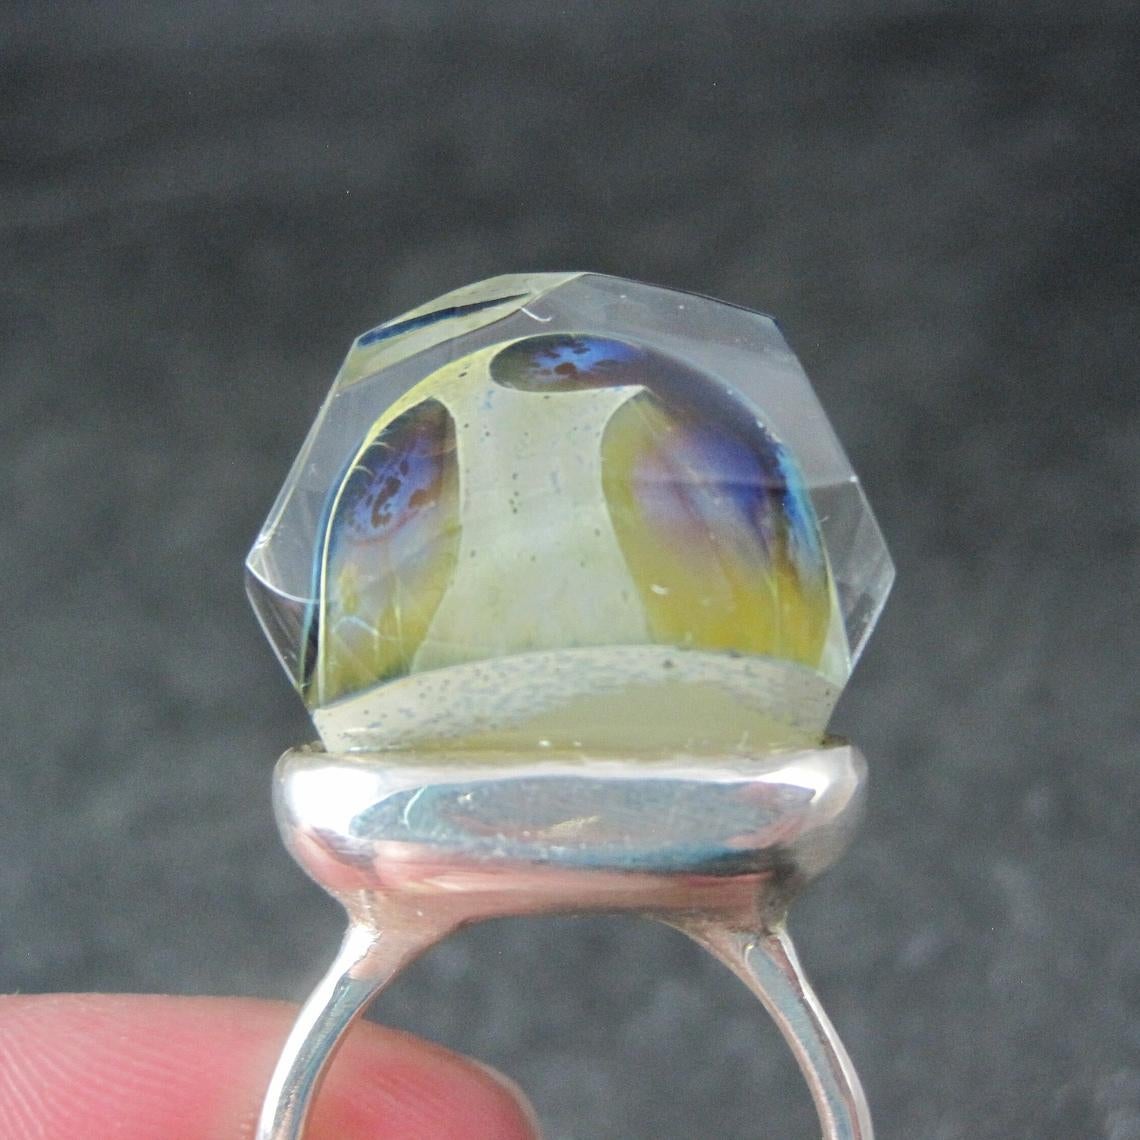 This stunning ring is sterling silver with a one-of-a-kind, high-set art glass stone.
The face of this ring measures 5/16 of an inch north to south, 13/16 of an inch east to west, and has a rise of 7/8 of an inch off the finger.
Size: 8
Marks: